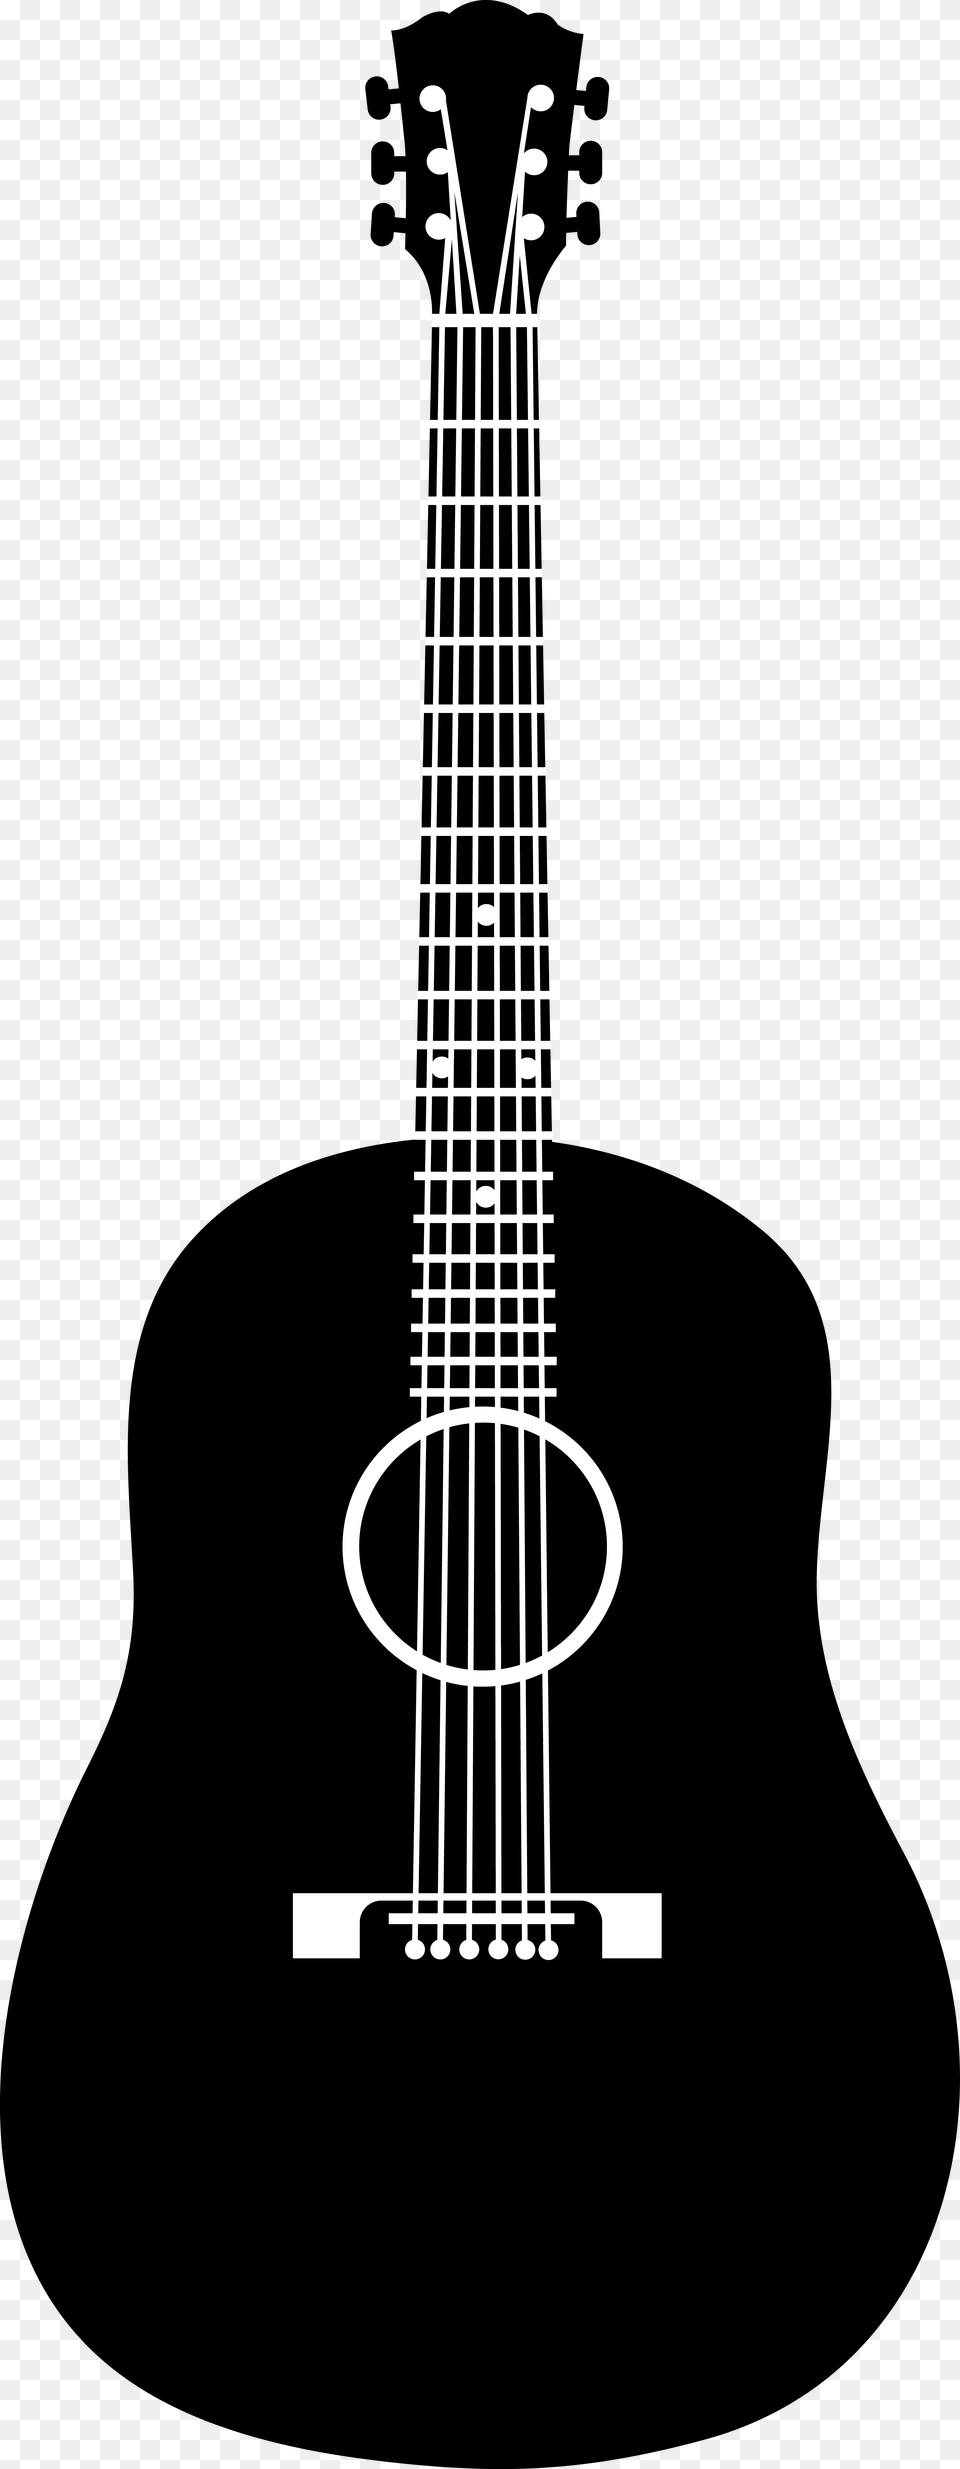 Guitar Silhouette Acoustic Guitar Clipart Black And White, Musical Instrument Free Png Download